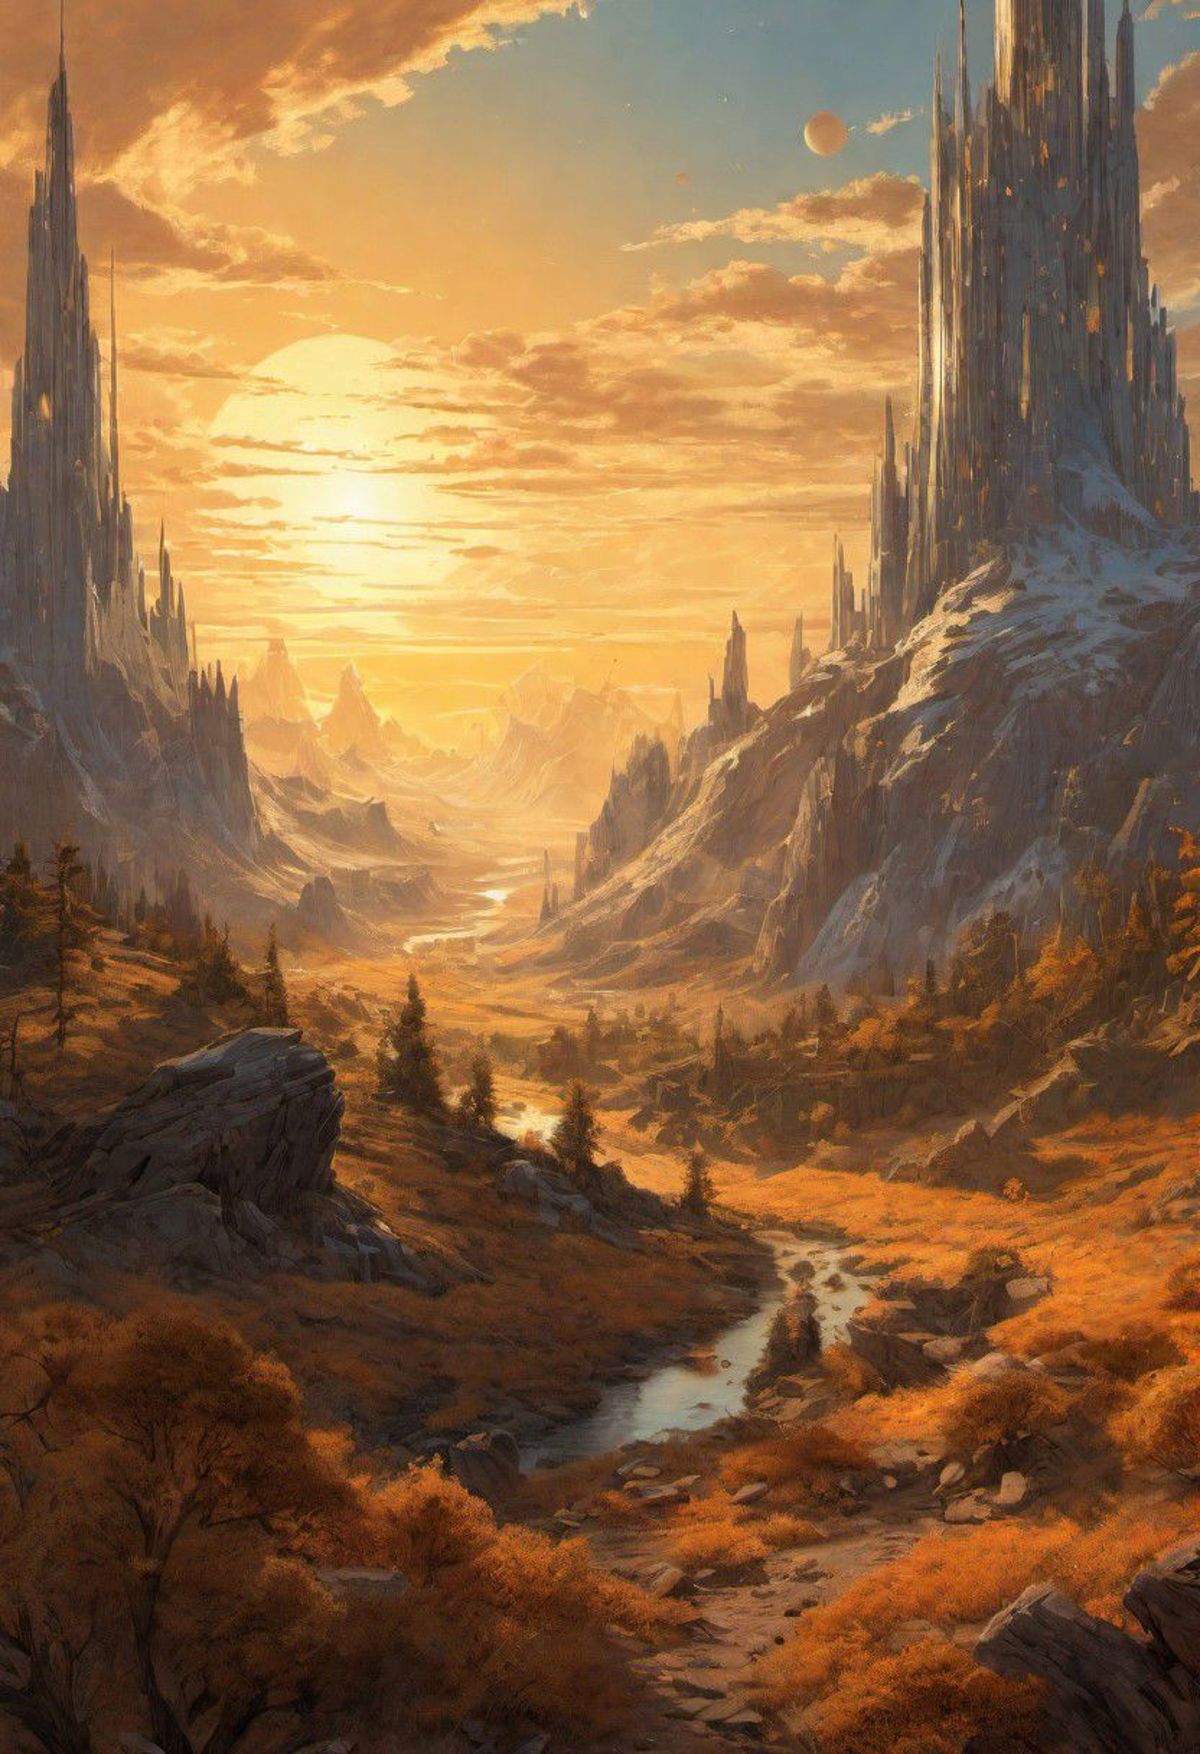 A Painting of a Mountainous Landscape at Sunset